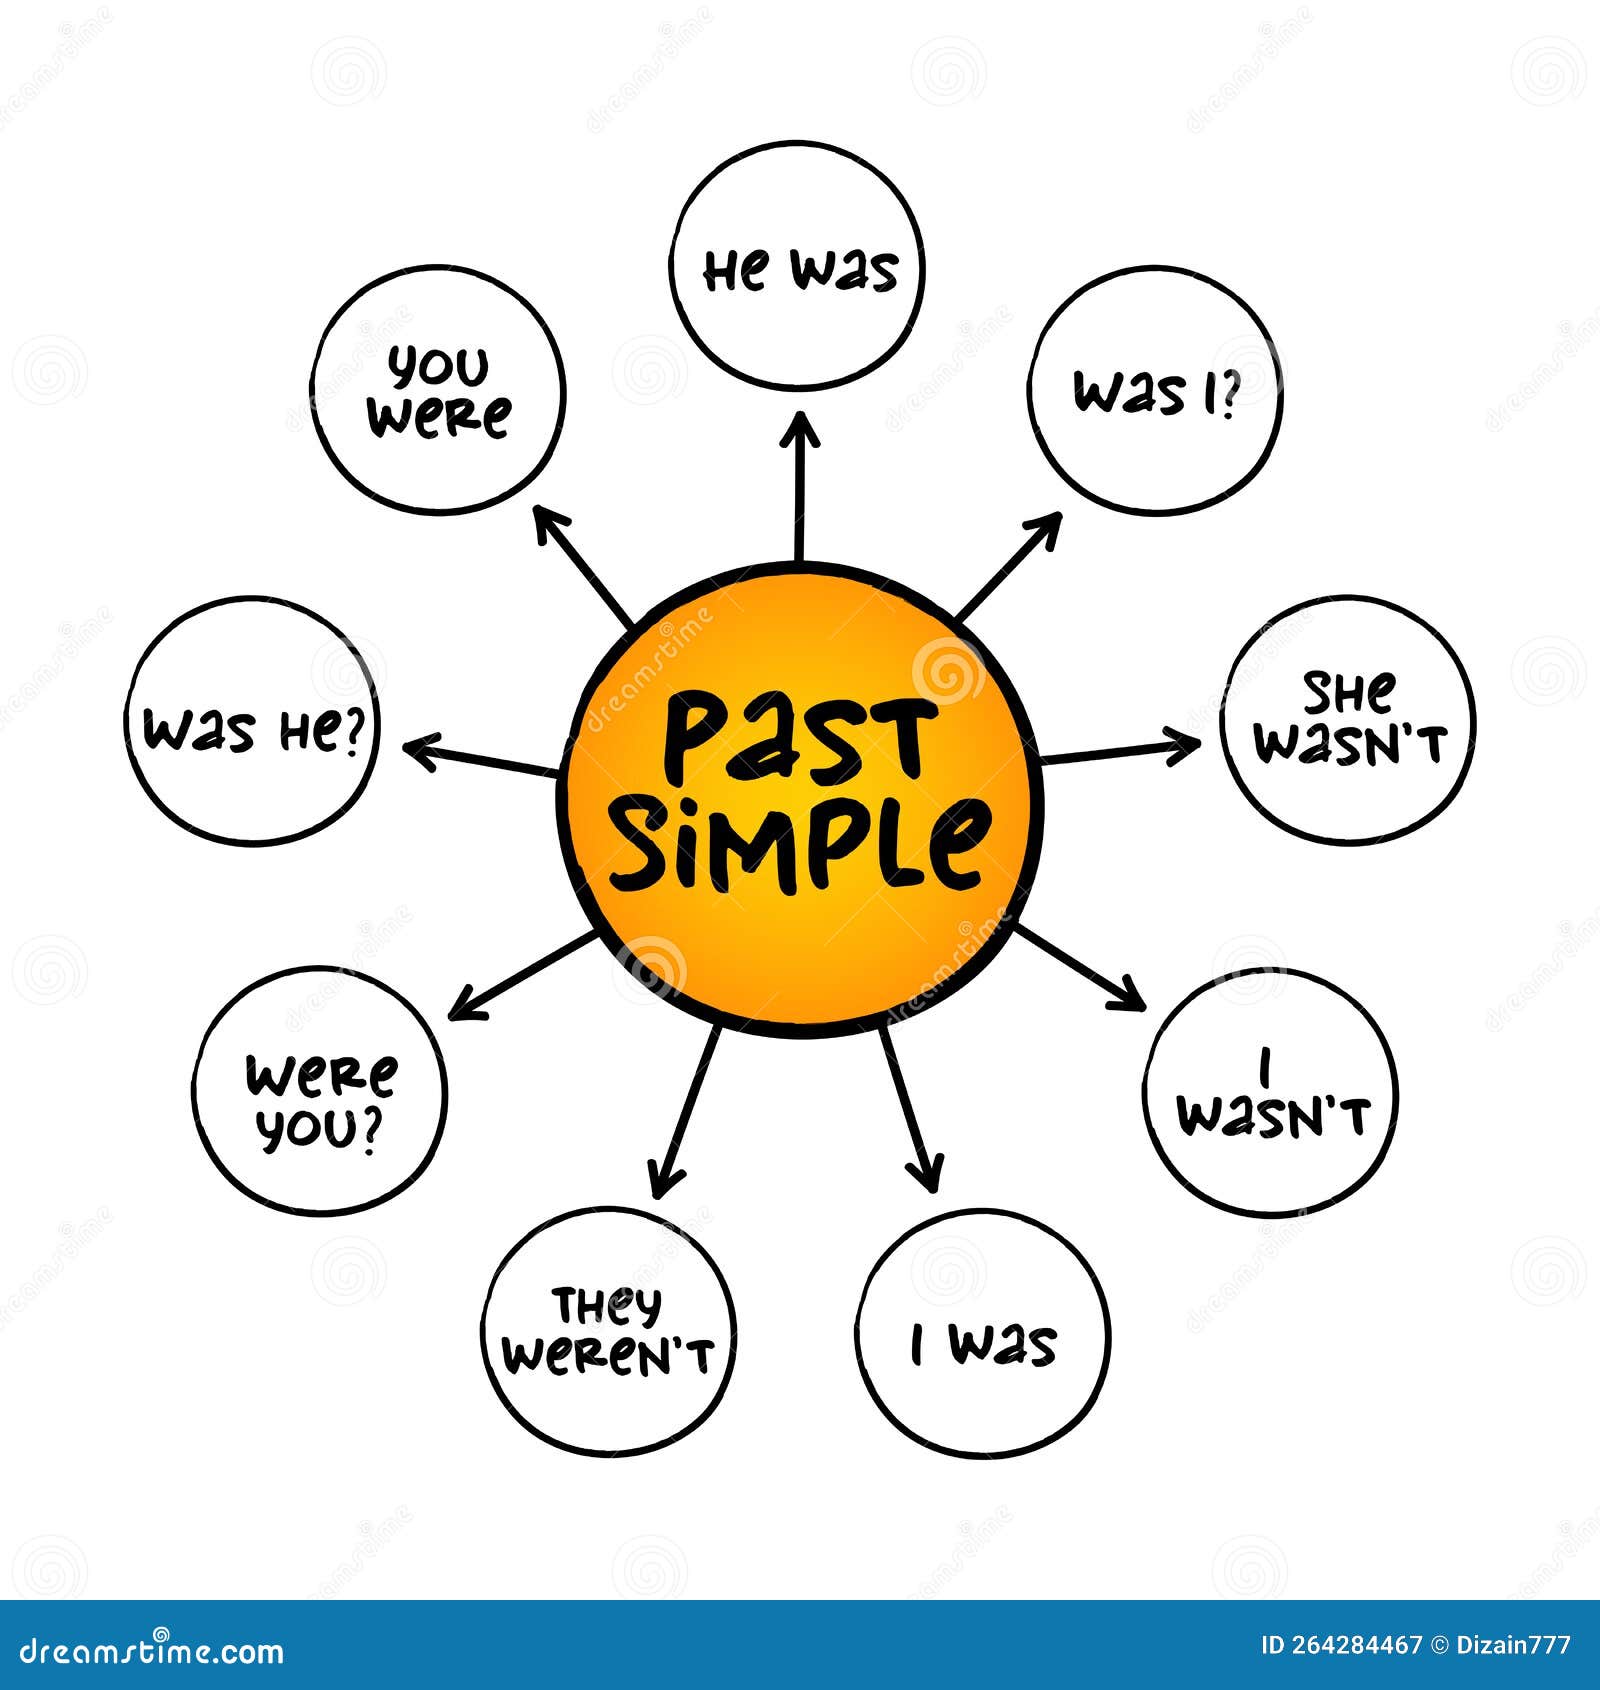 Past Simple Tense in English